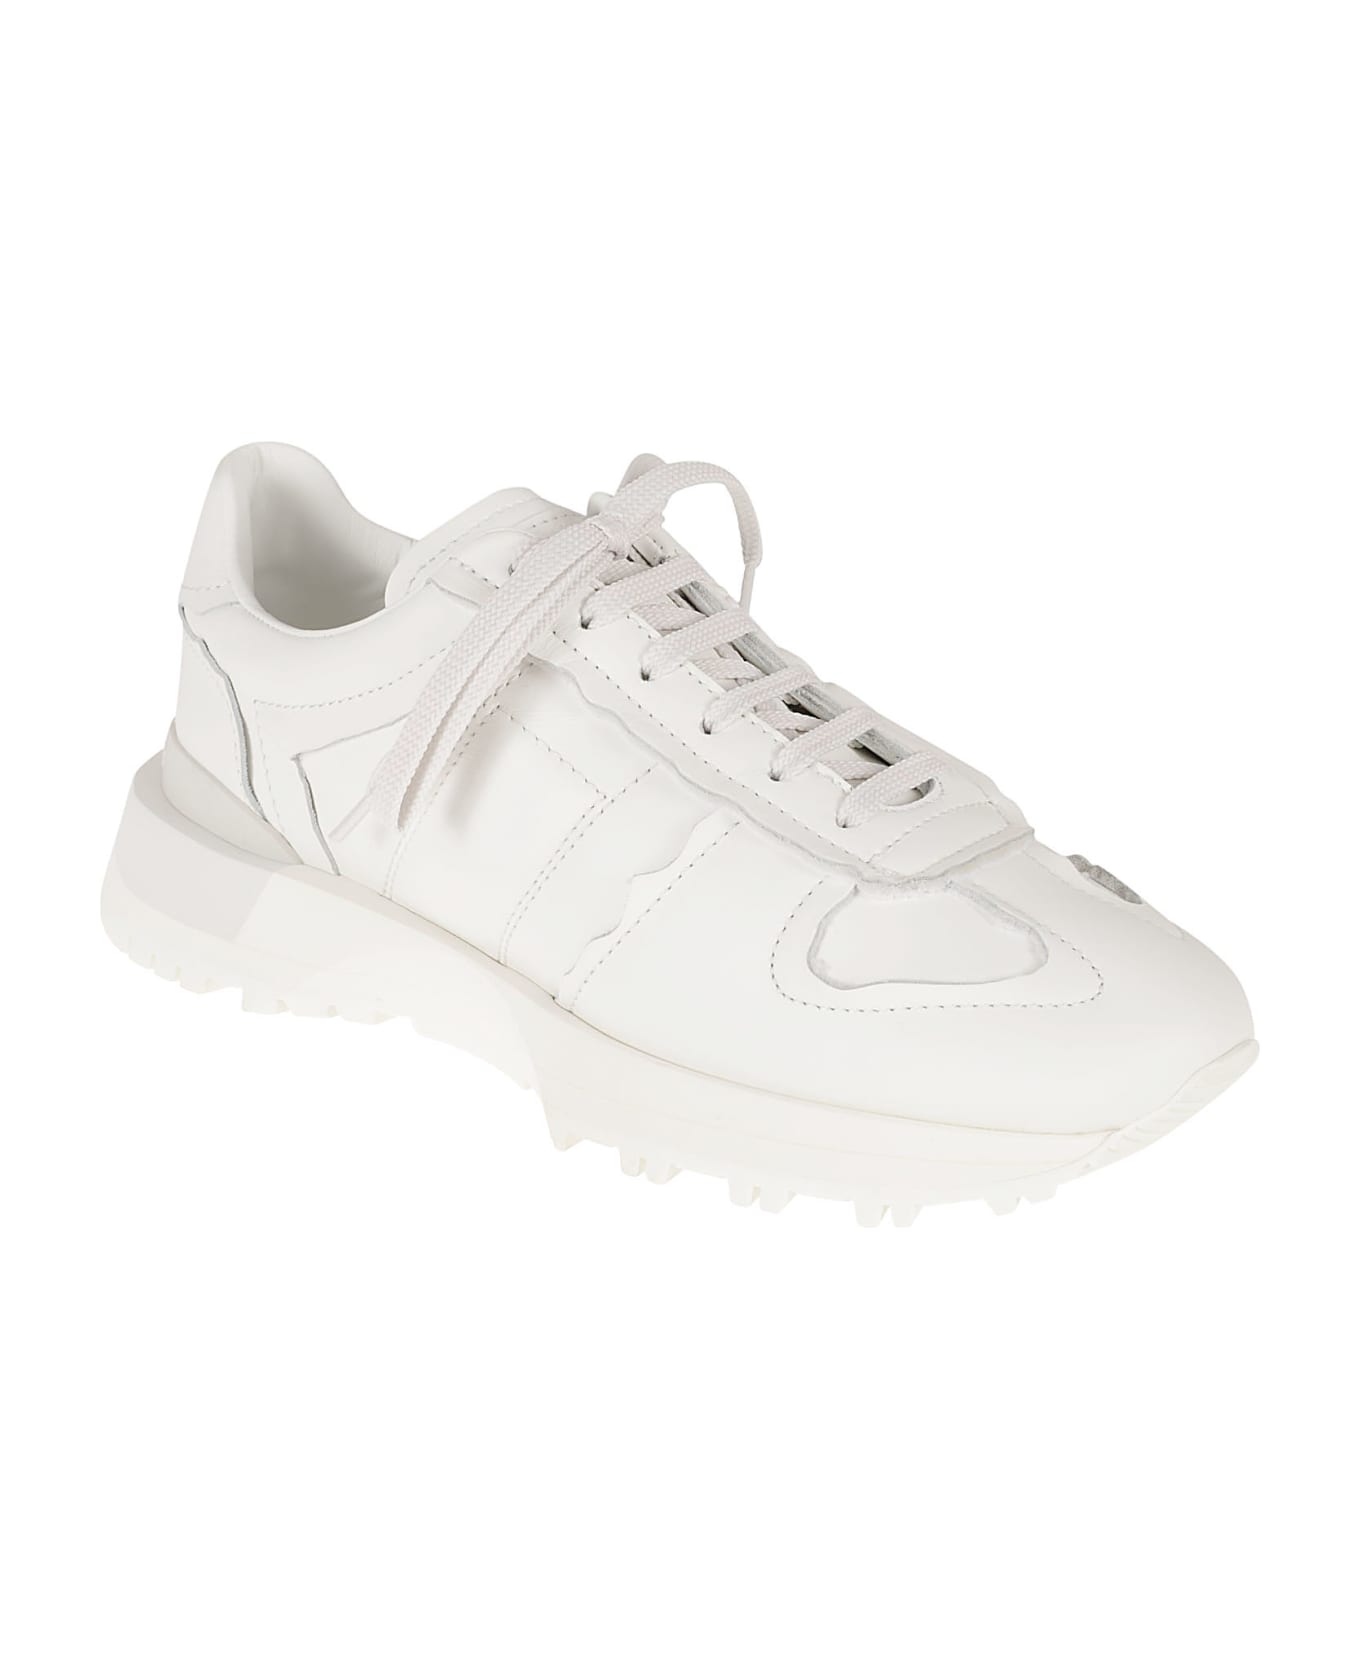 Maison Margiela Classic Fitted Lace-up Sneakers - White スニーカー